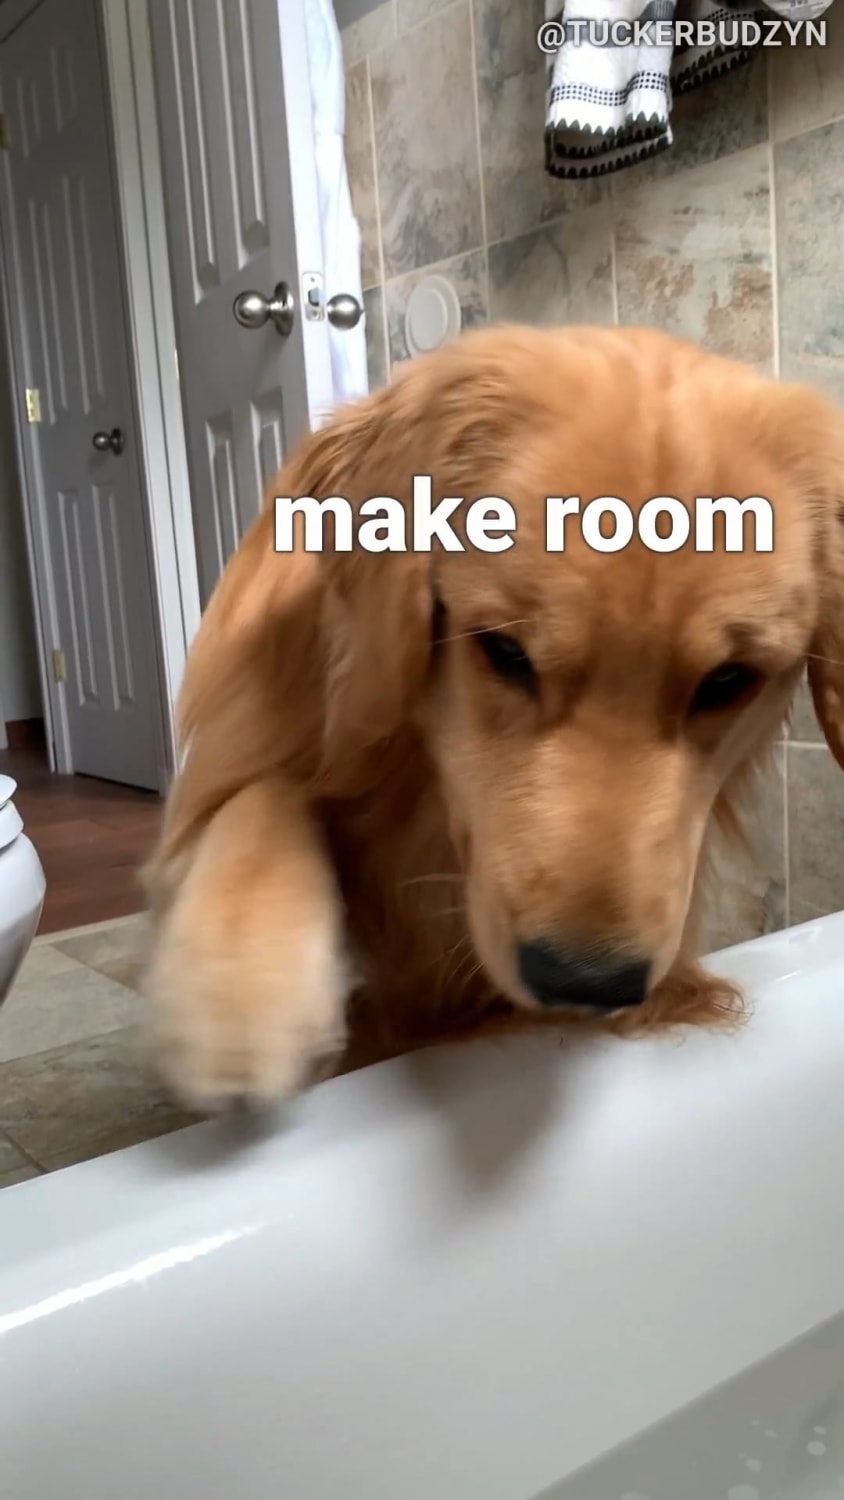 My Dog Tries to Get In the Tub With Me